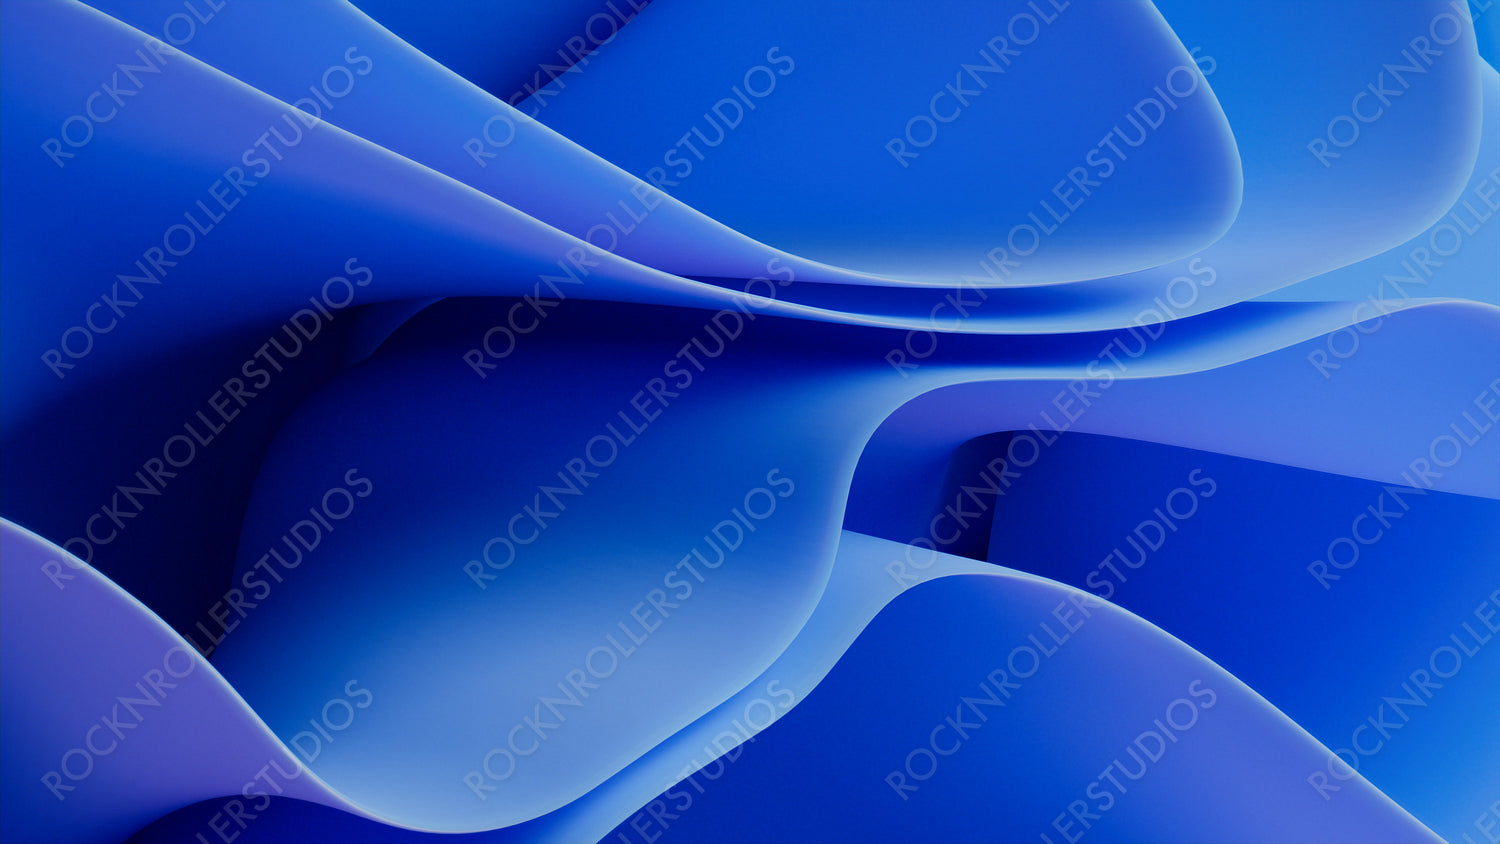 Modern, Blue Surfaces with Waves. Abstract 3D Background.